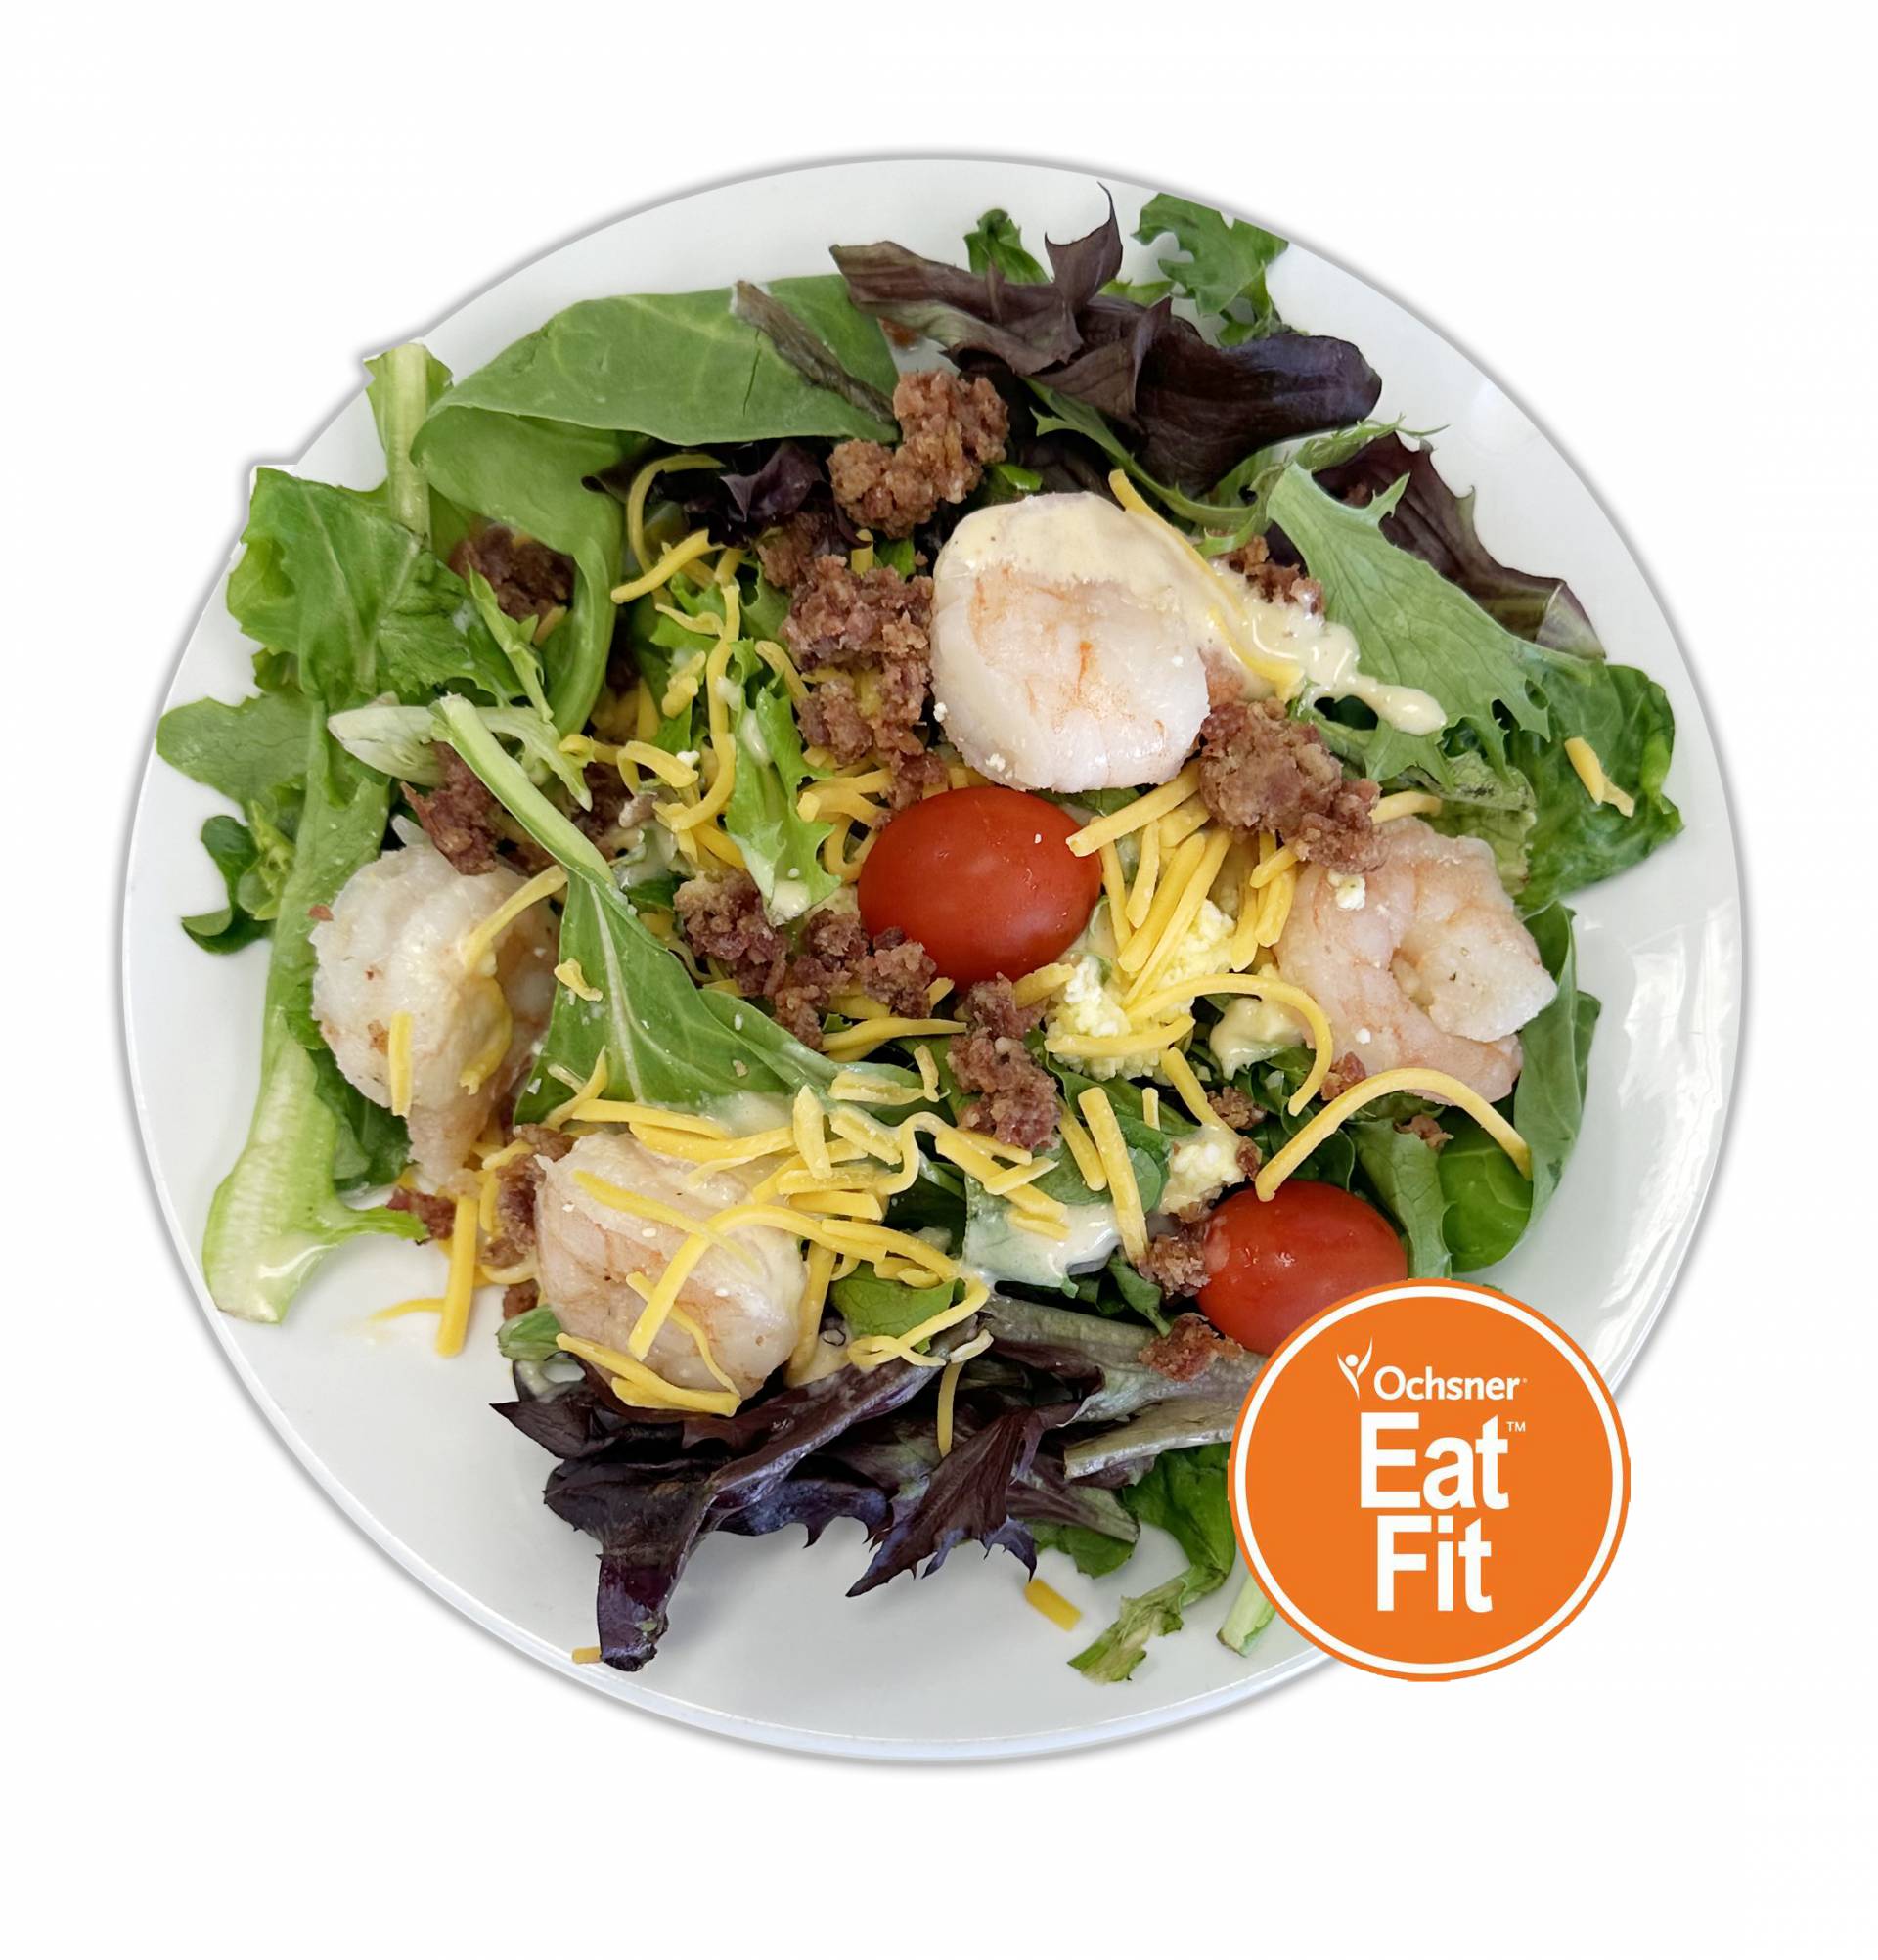 Cobb Salad with Shrimp, Spring Mix, Bacon, Boiled Eggs and House Made Dijon Dressing - Low Fat